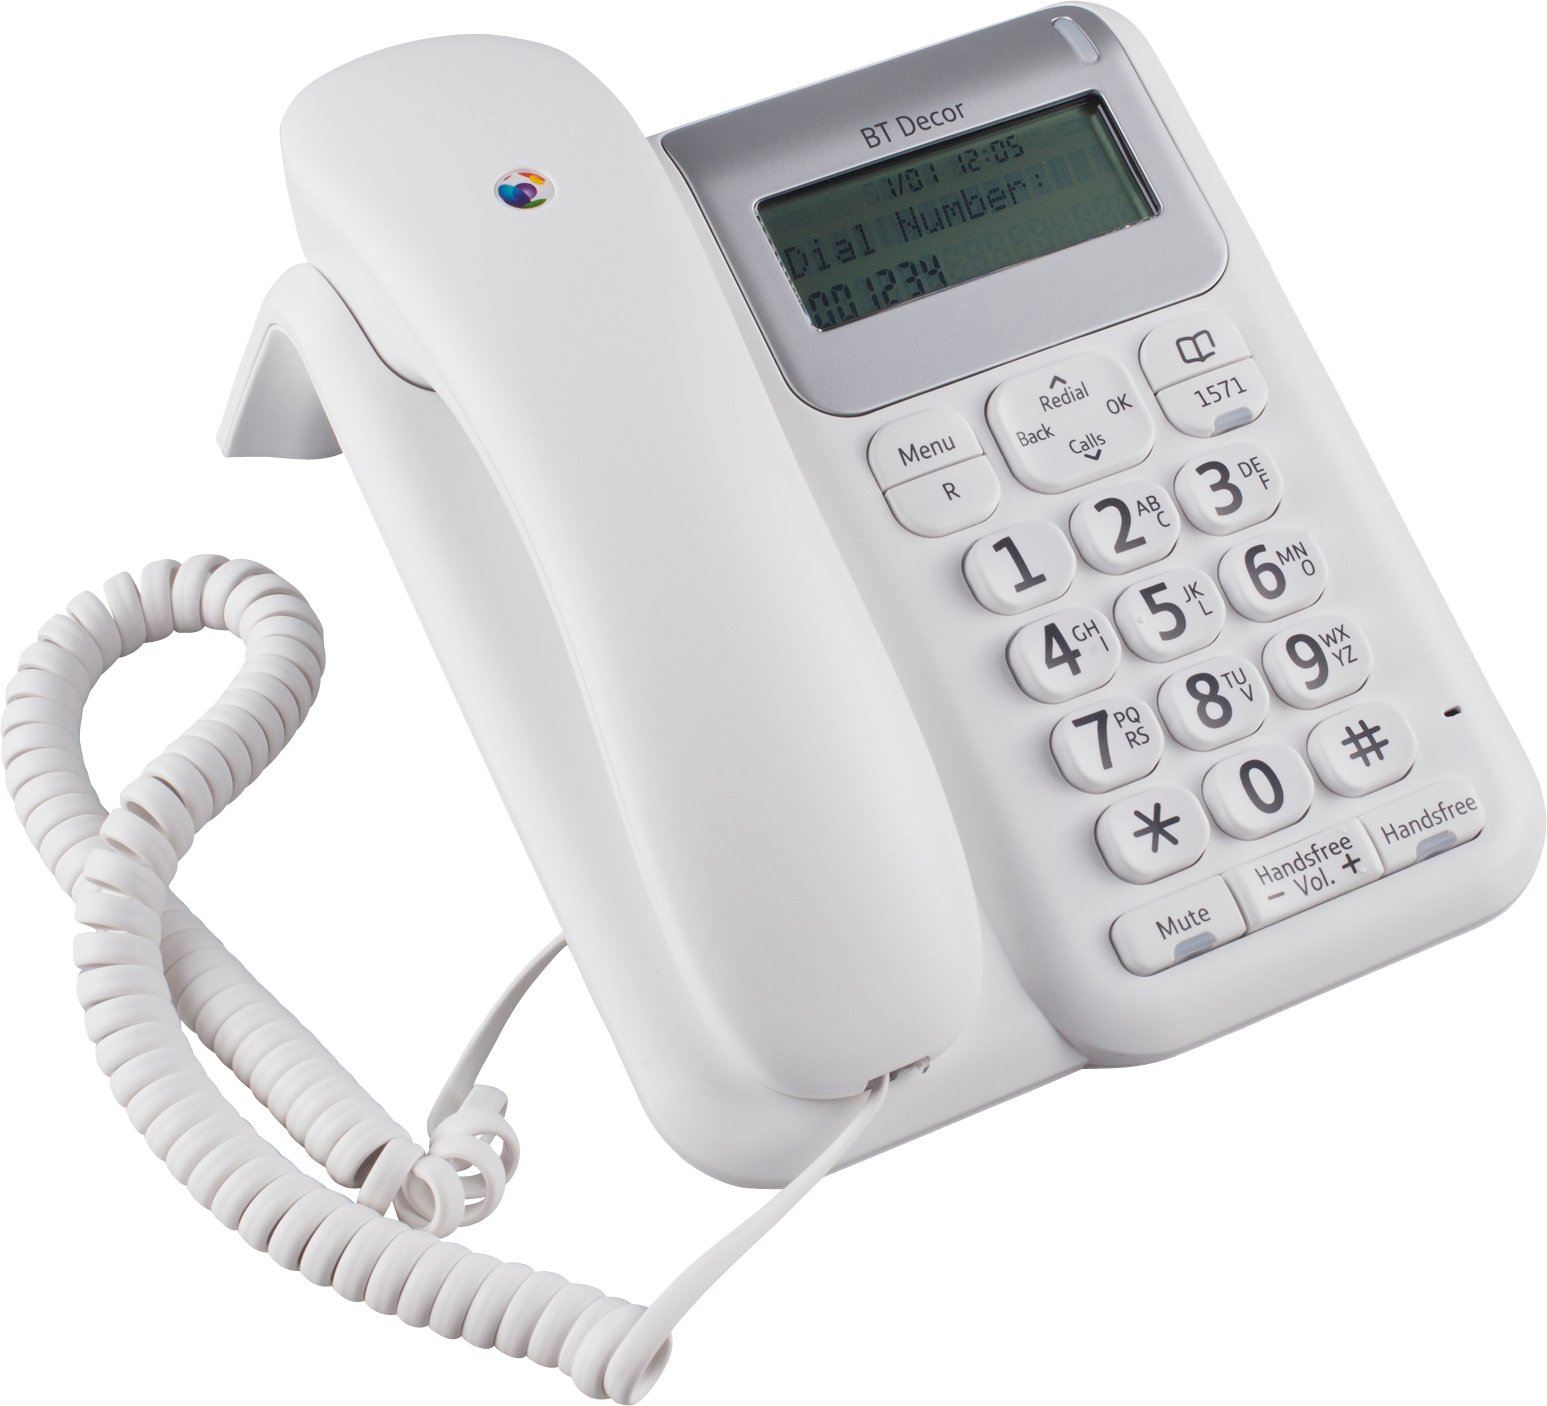 BT 2200 Decor Corded Telephone Review